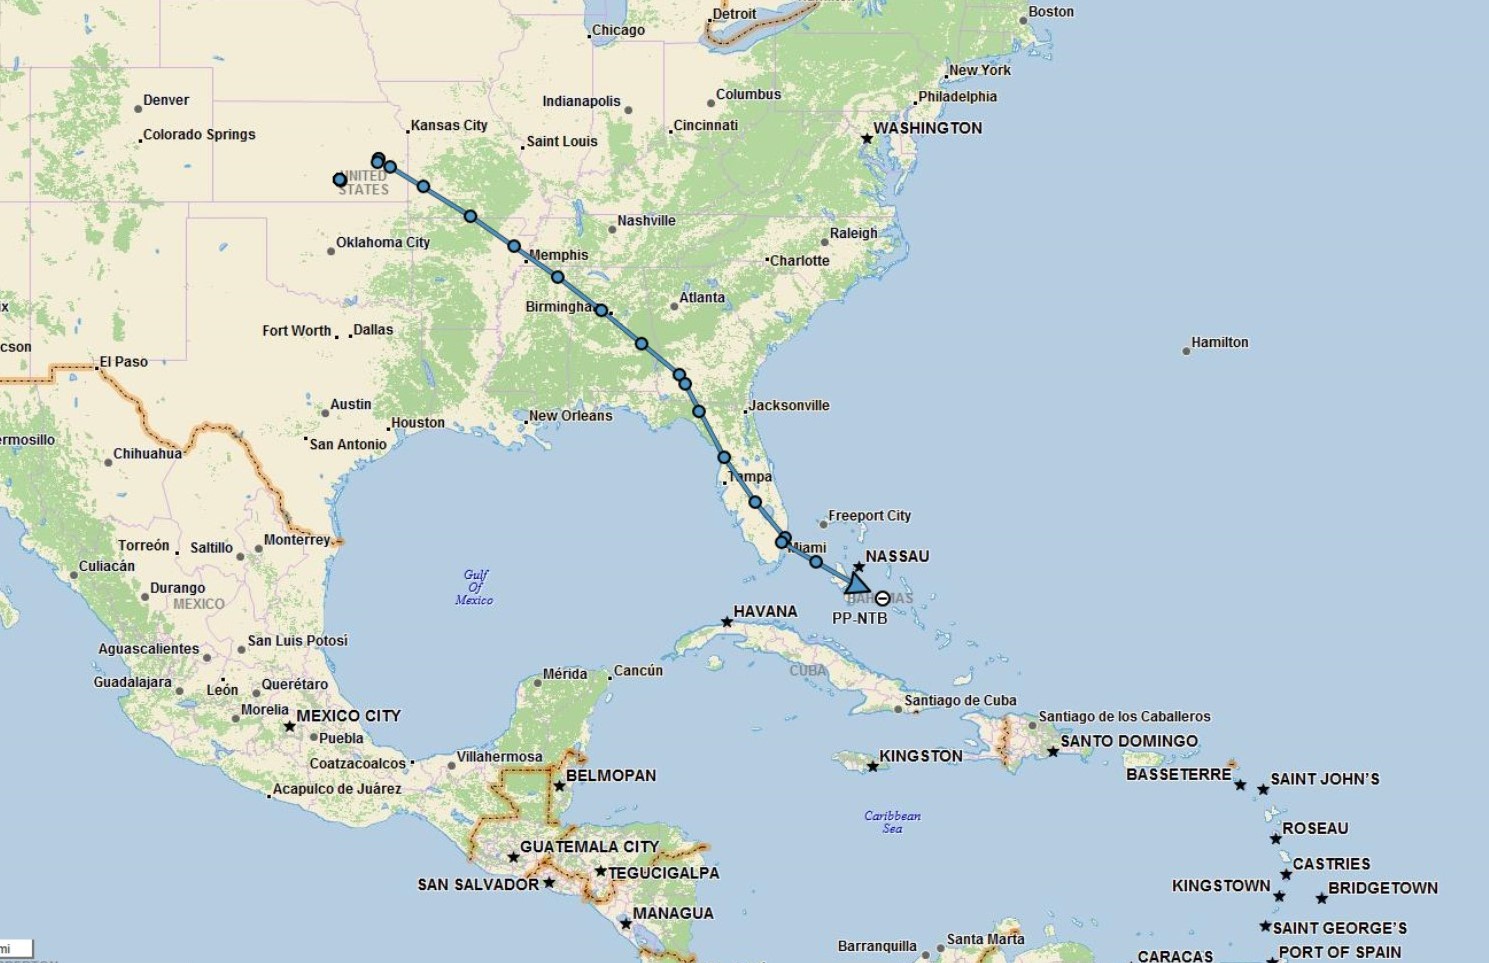 Tracking all the way to Brazil - Ethnos360 Aviation